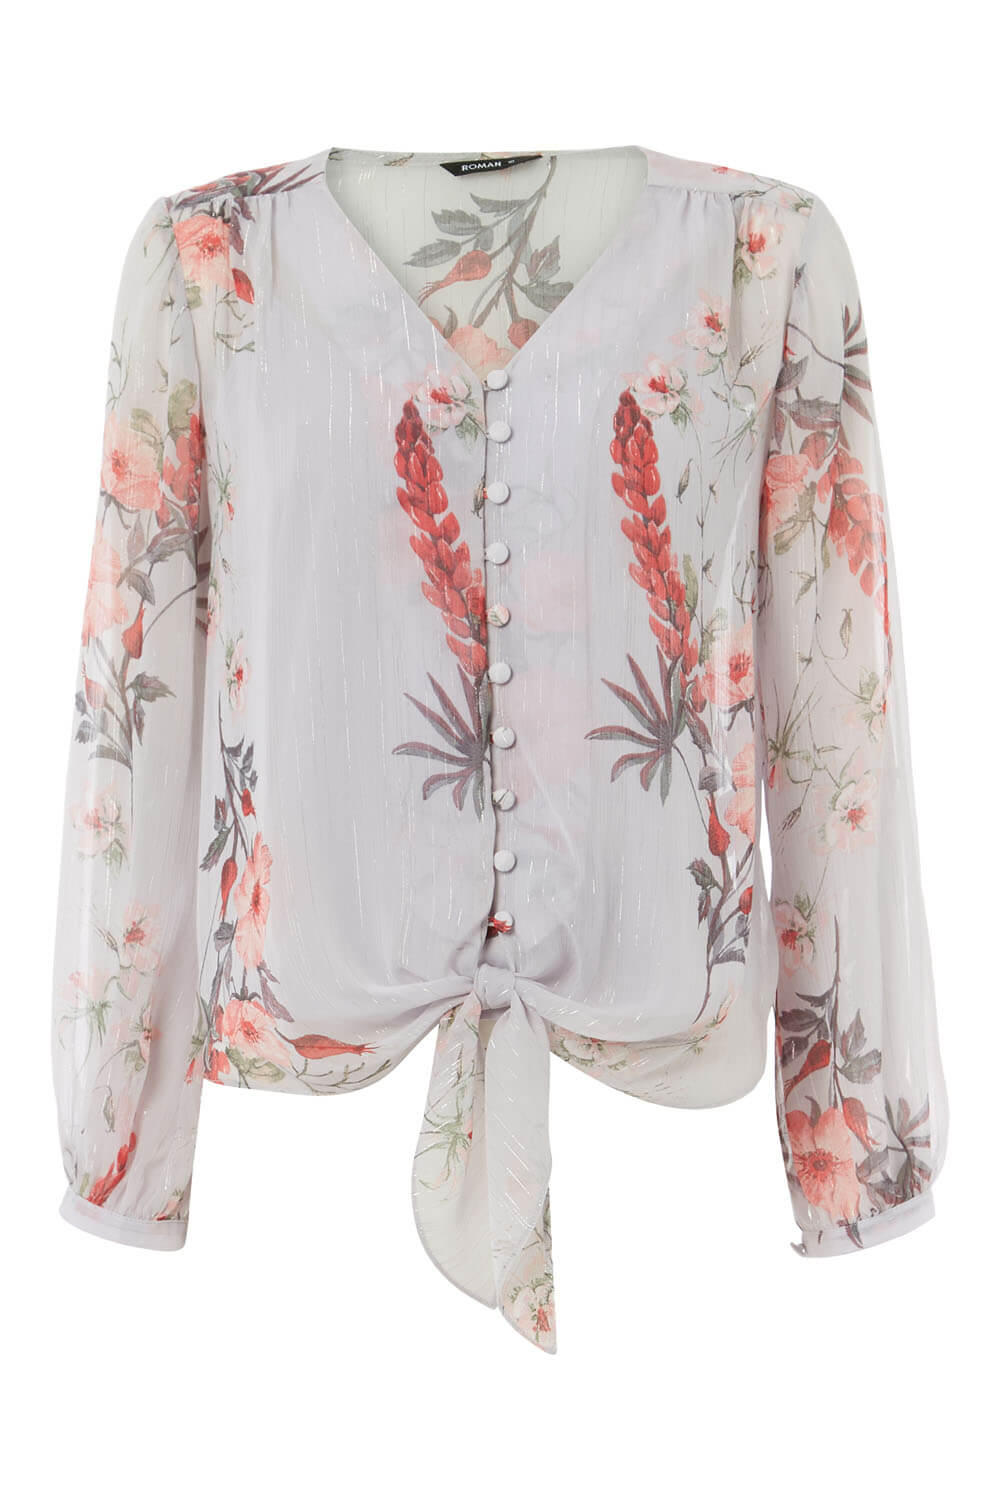 Light Grey Floral Tie Front Button Blouse , Image 5 of 5